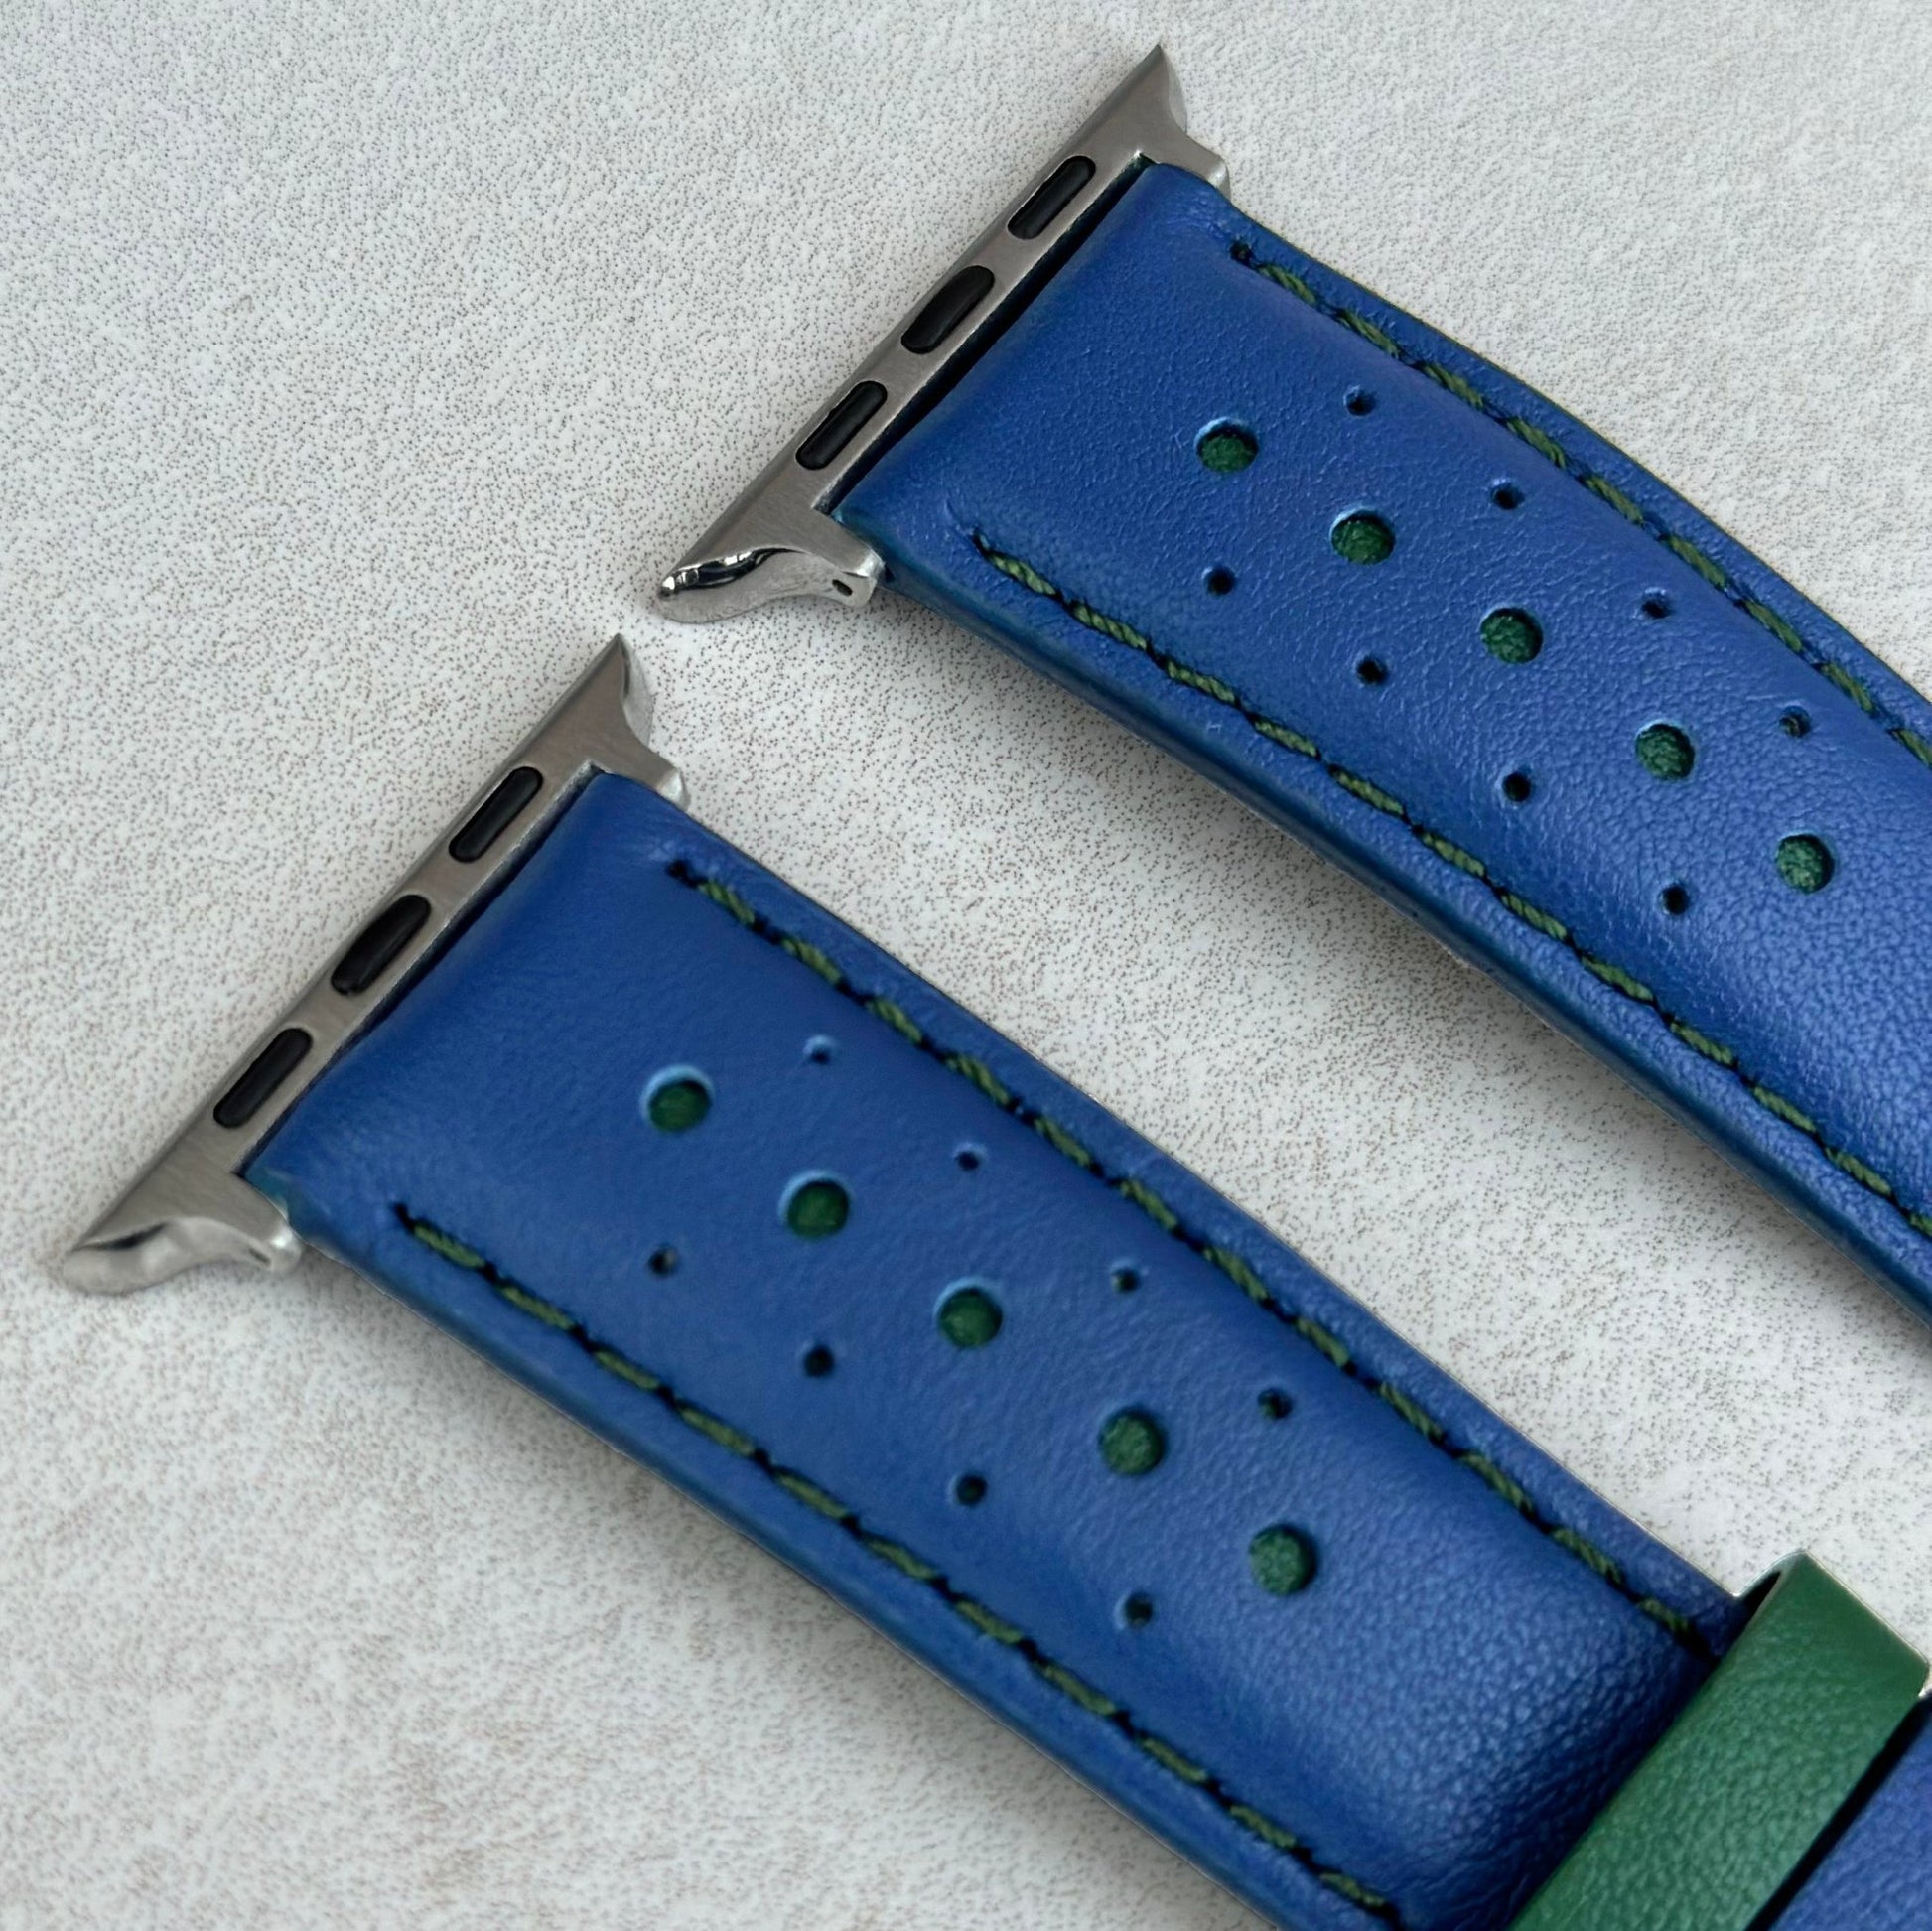 Padded apple watch strap. Cobalt blue and forest green leather. Green stitching, stainless steel apple watch connectors.